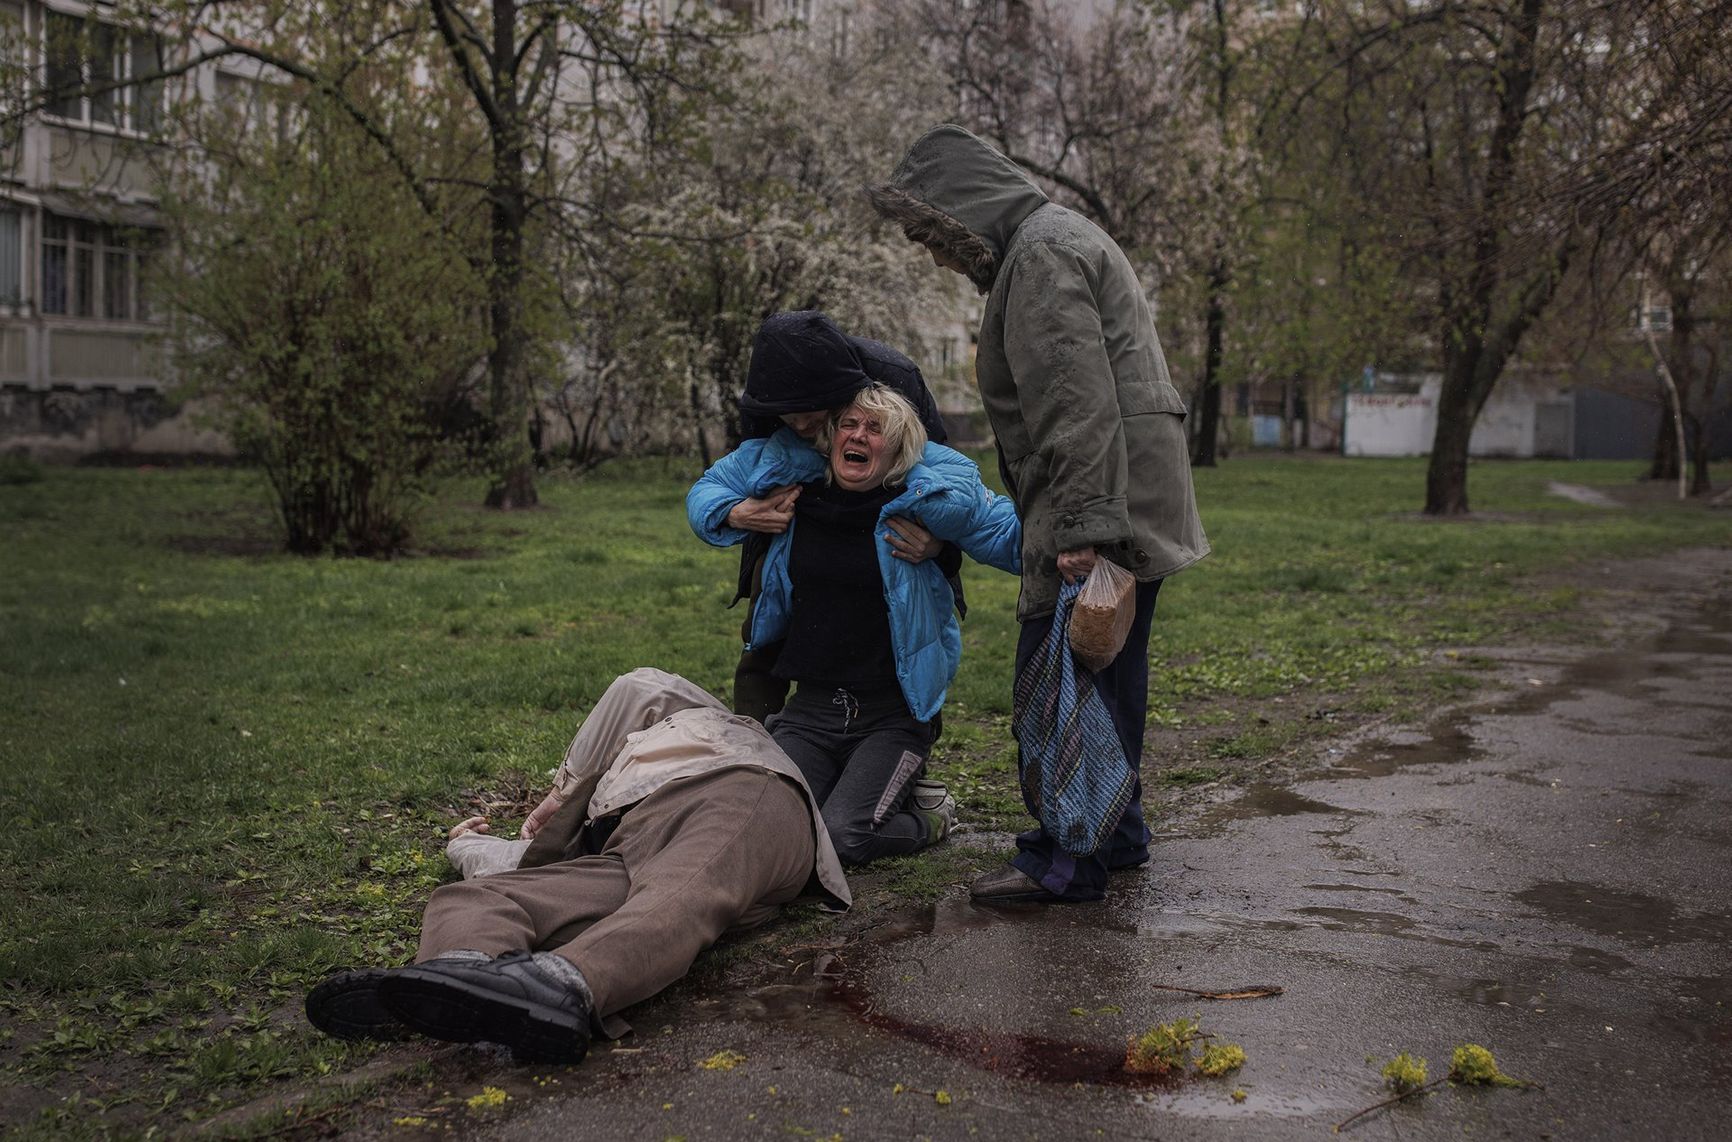 Consoled by her partner Yevgeniy Vlasenko and her mother Lyubov, Yana Bachek cries over the body of her father Victor Gubarev (79), killed while buying bread during the shelling of Kharkiv, Ukraine.